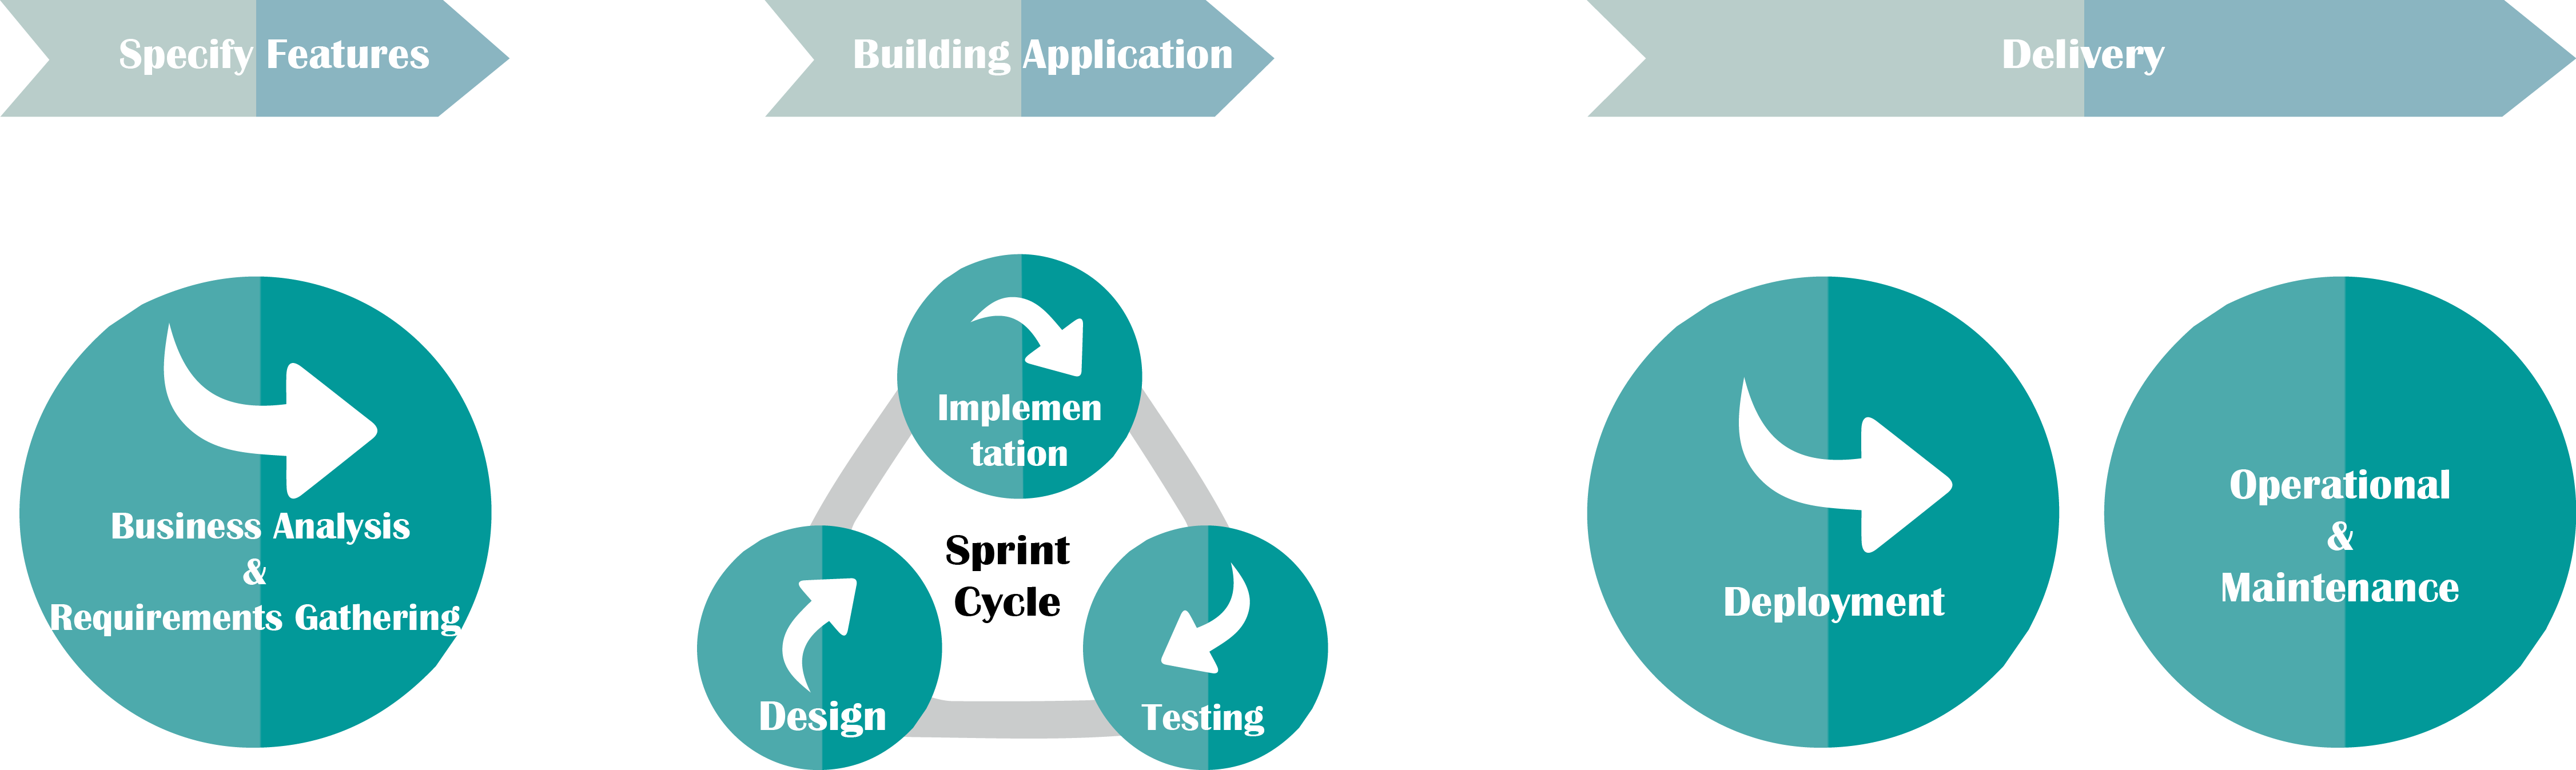 Software Development Process, Which Includes Full Cycle - Data Analytic Software Development (4505x1347)